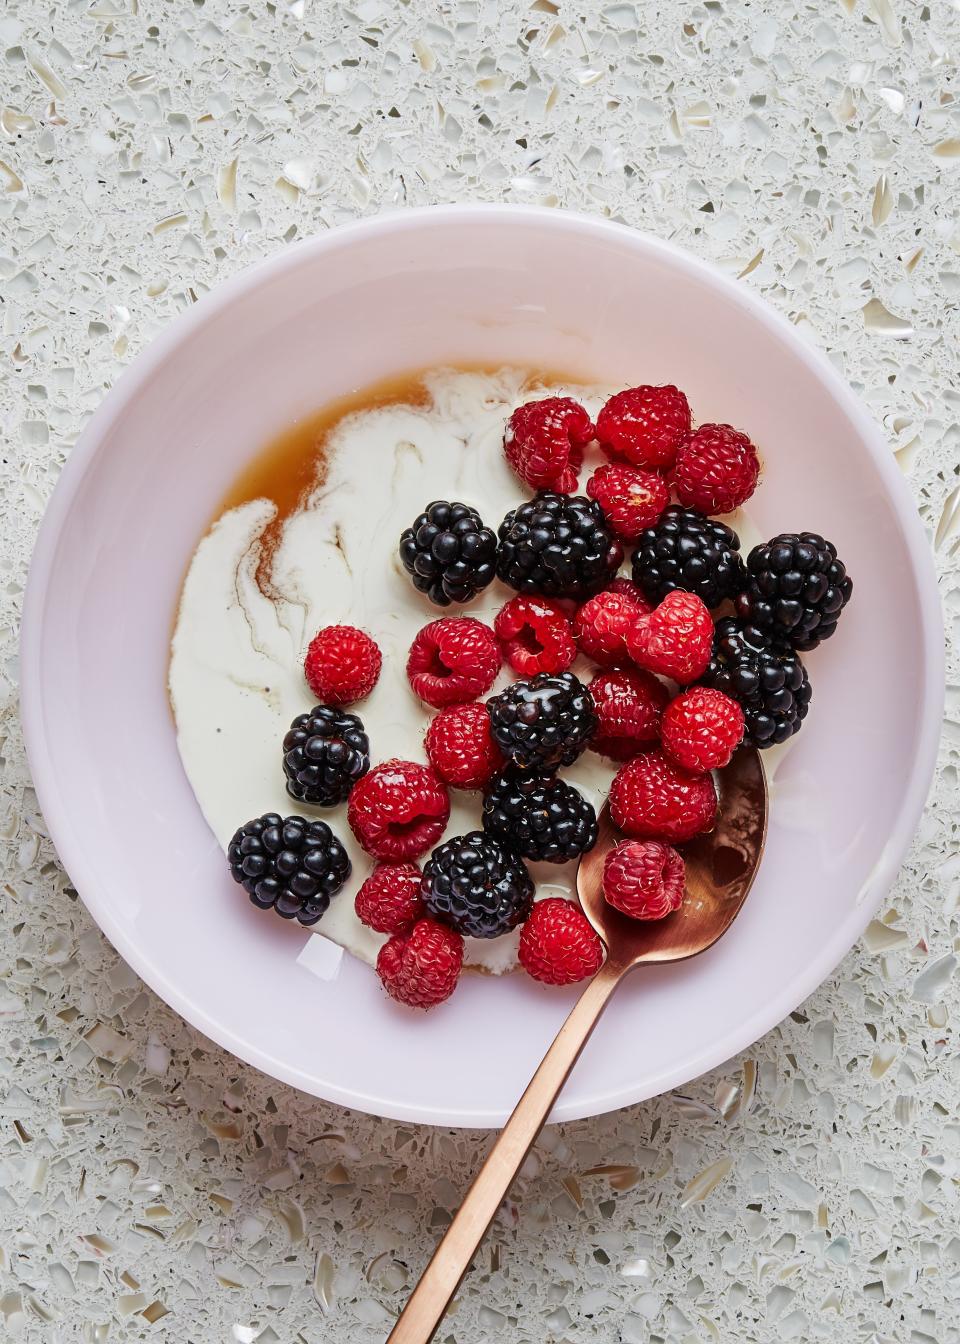 Summer should be as simple as this berries and cream dessert.